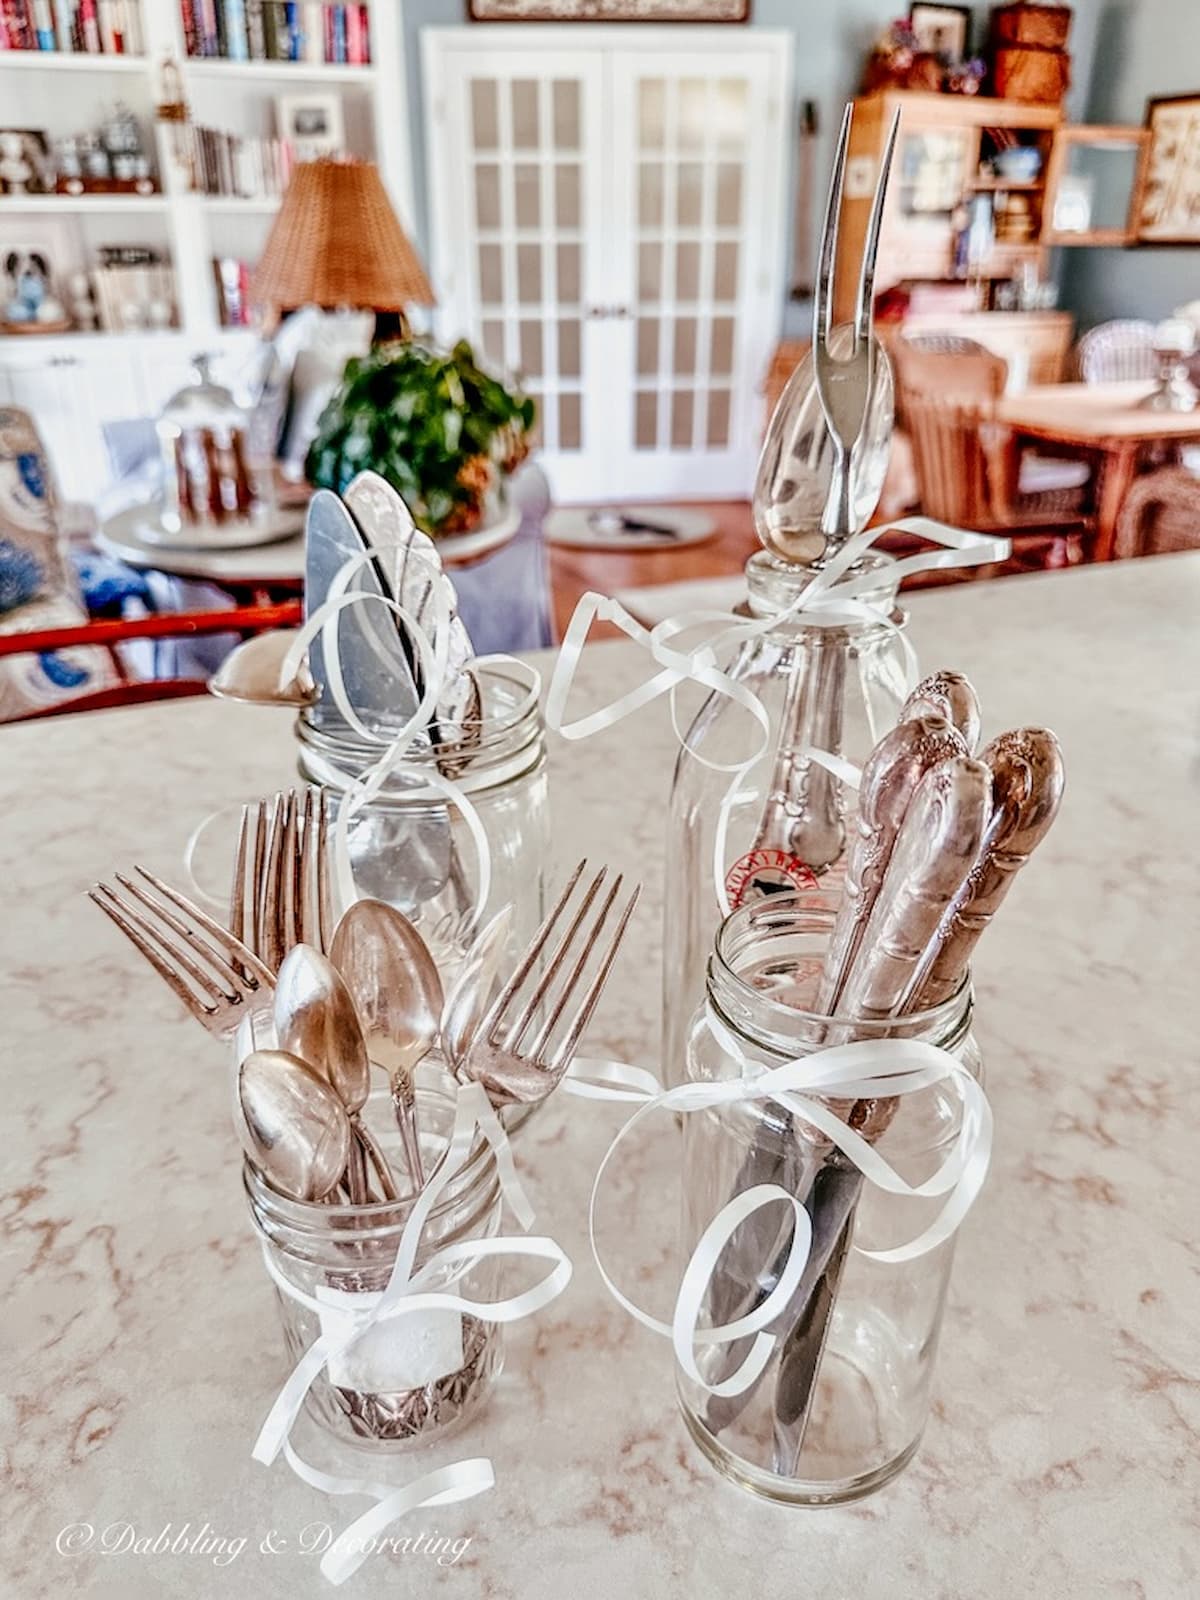 Vintage Silverware in Mason Jars on kitchen counter with white bows.